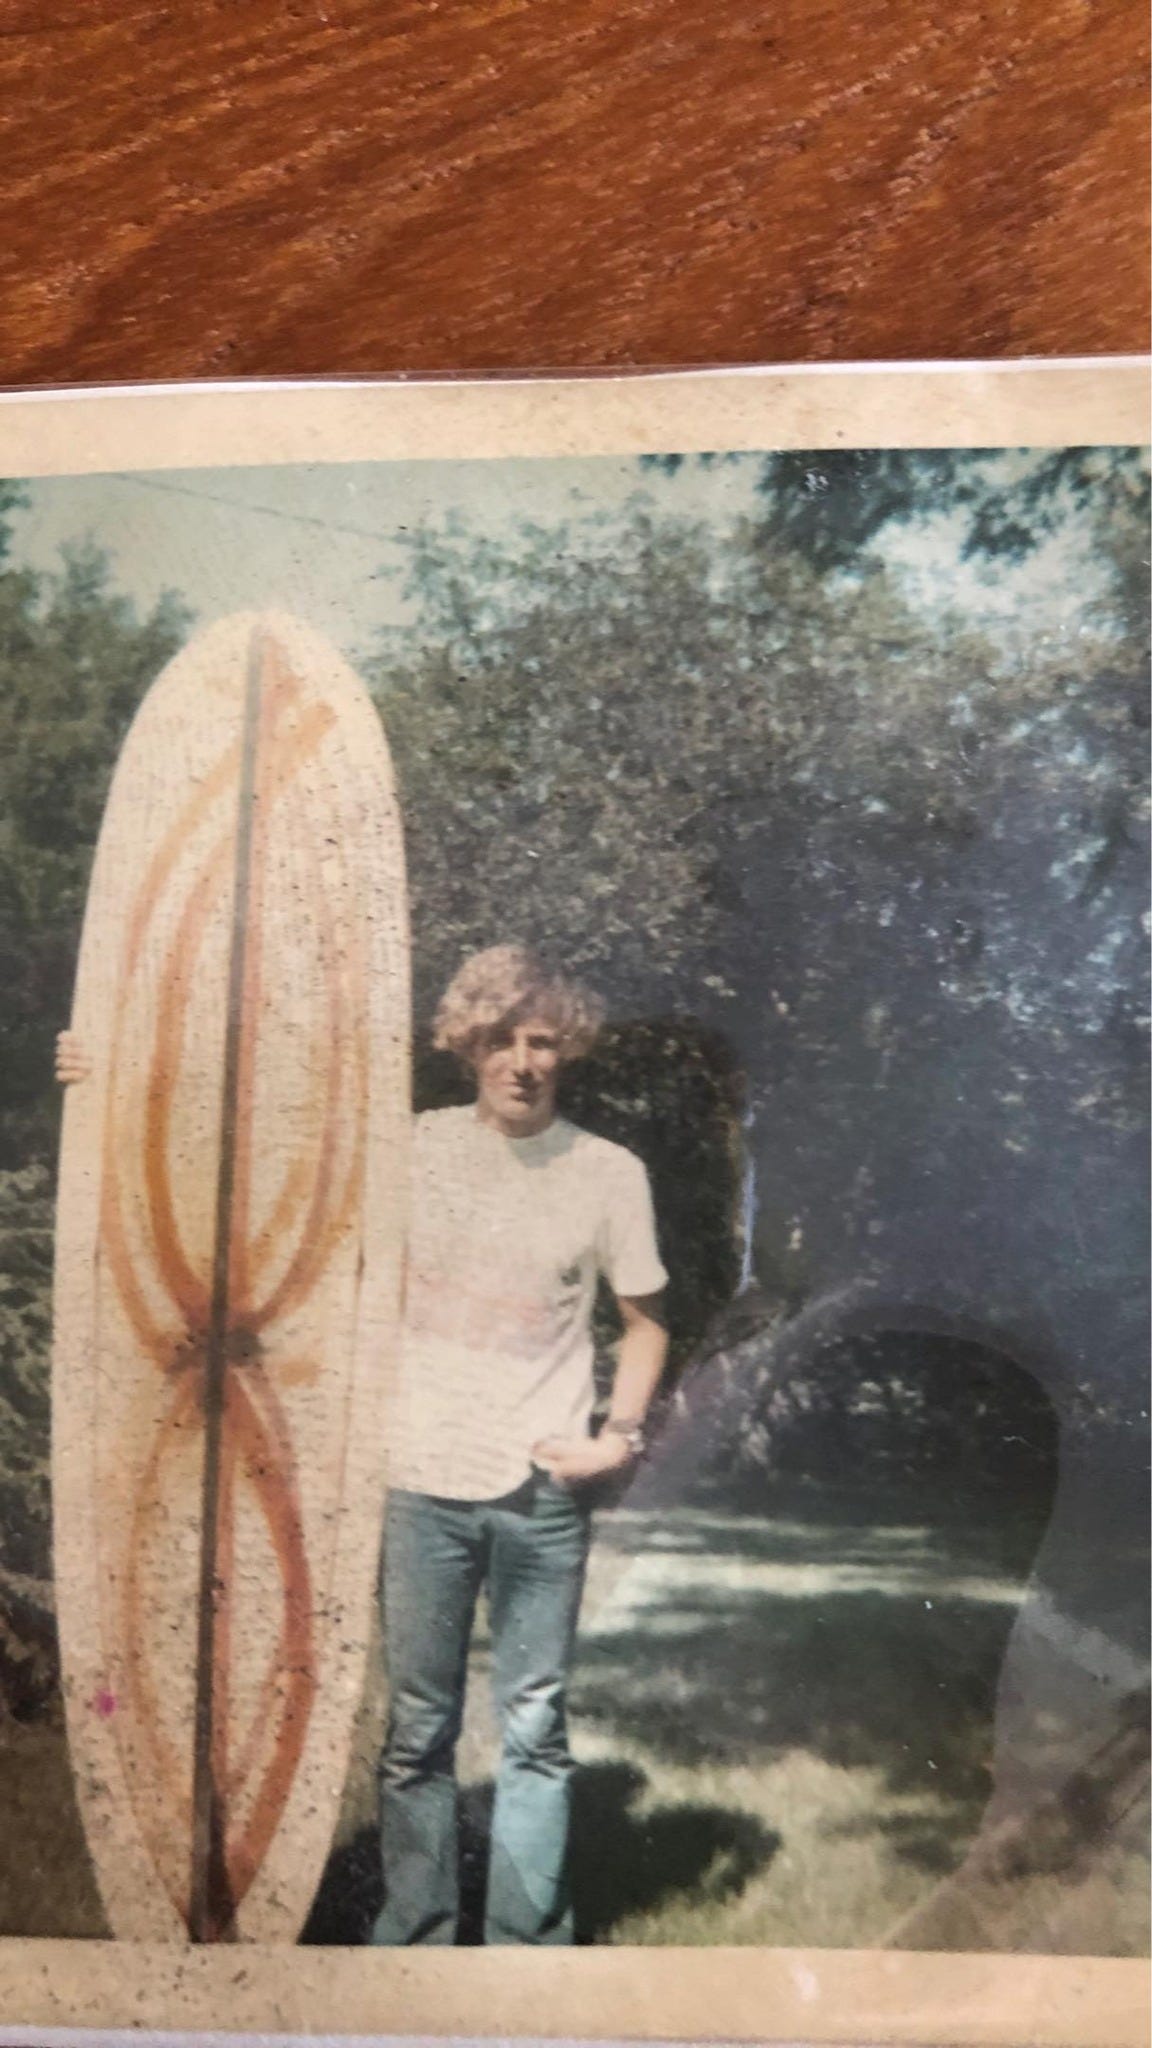 May be an image of 1 person, skateboard and surfboard